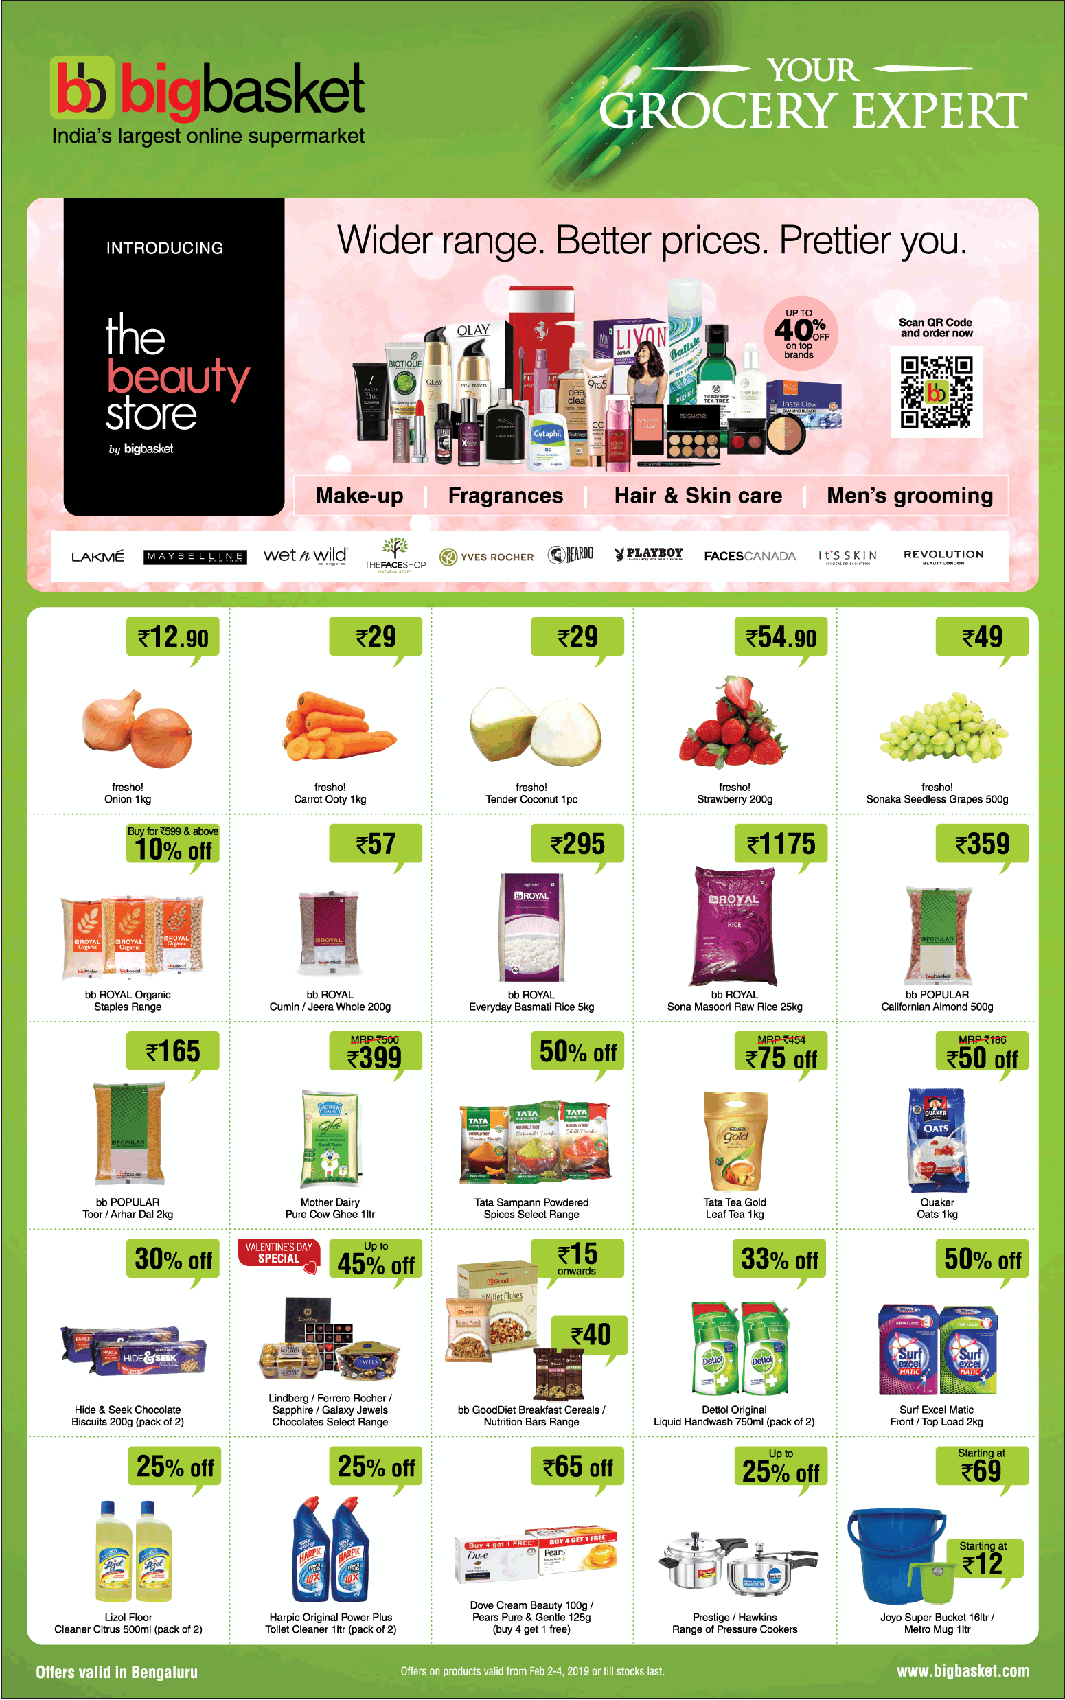 bigbasket-the-beauty-store-wider-range-better-prices-ad-bangalore-times-02-02-2019.png